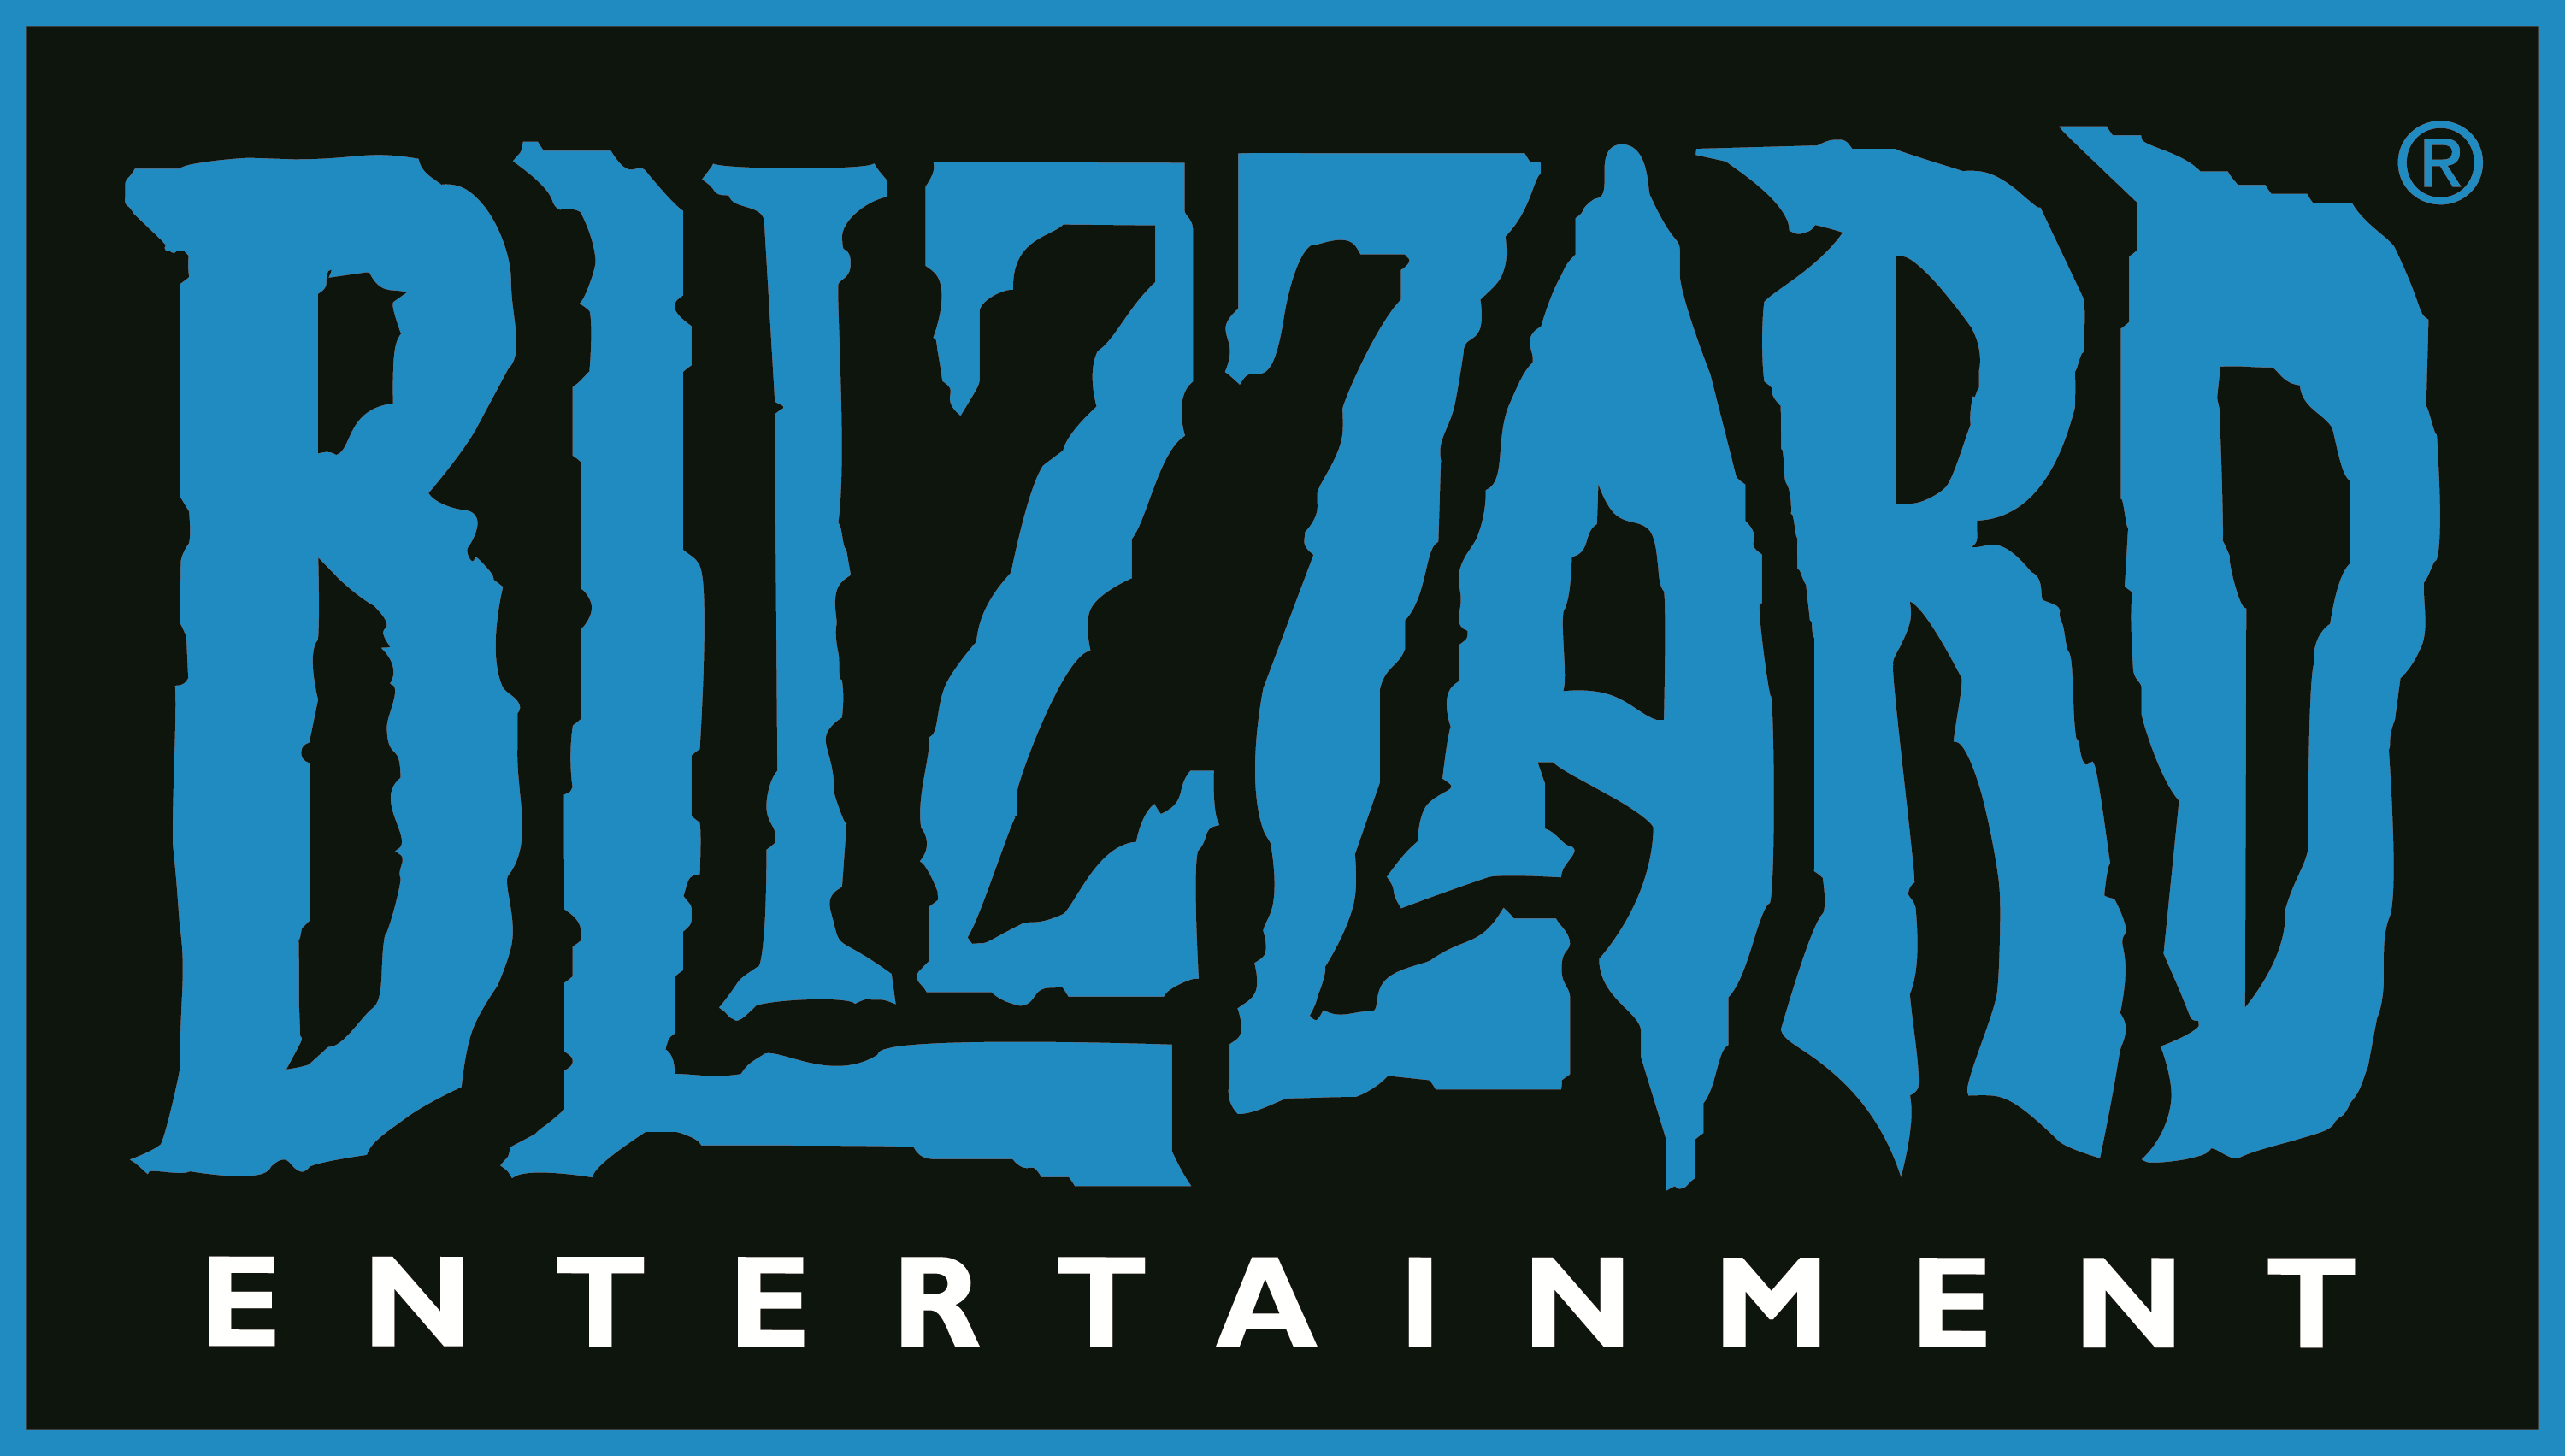 General 3000x1703 Blizzard Entertainment video games blue logo PC gaming